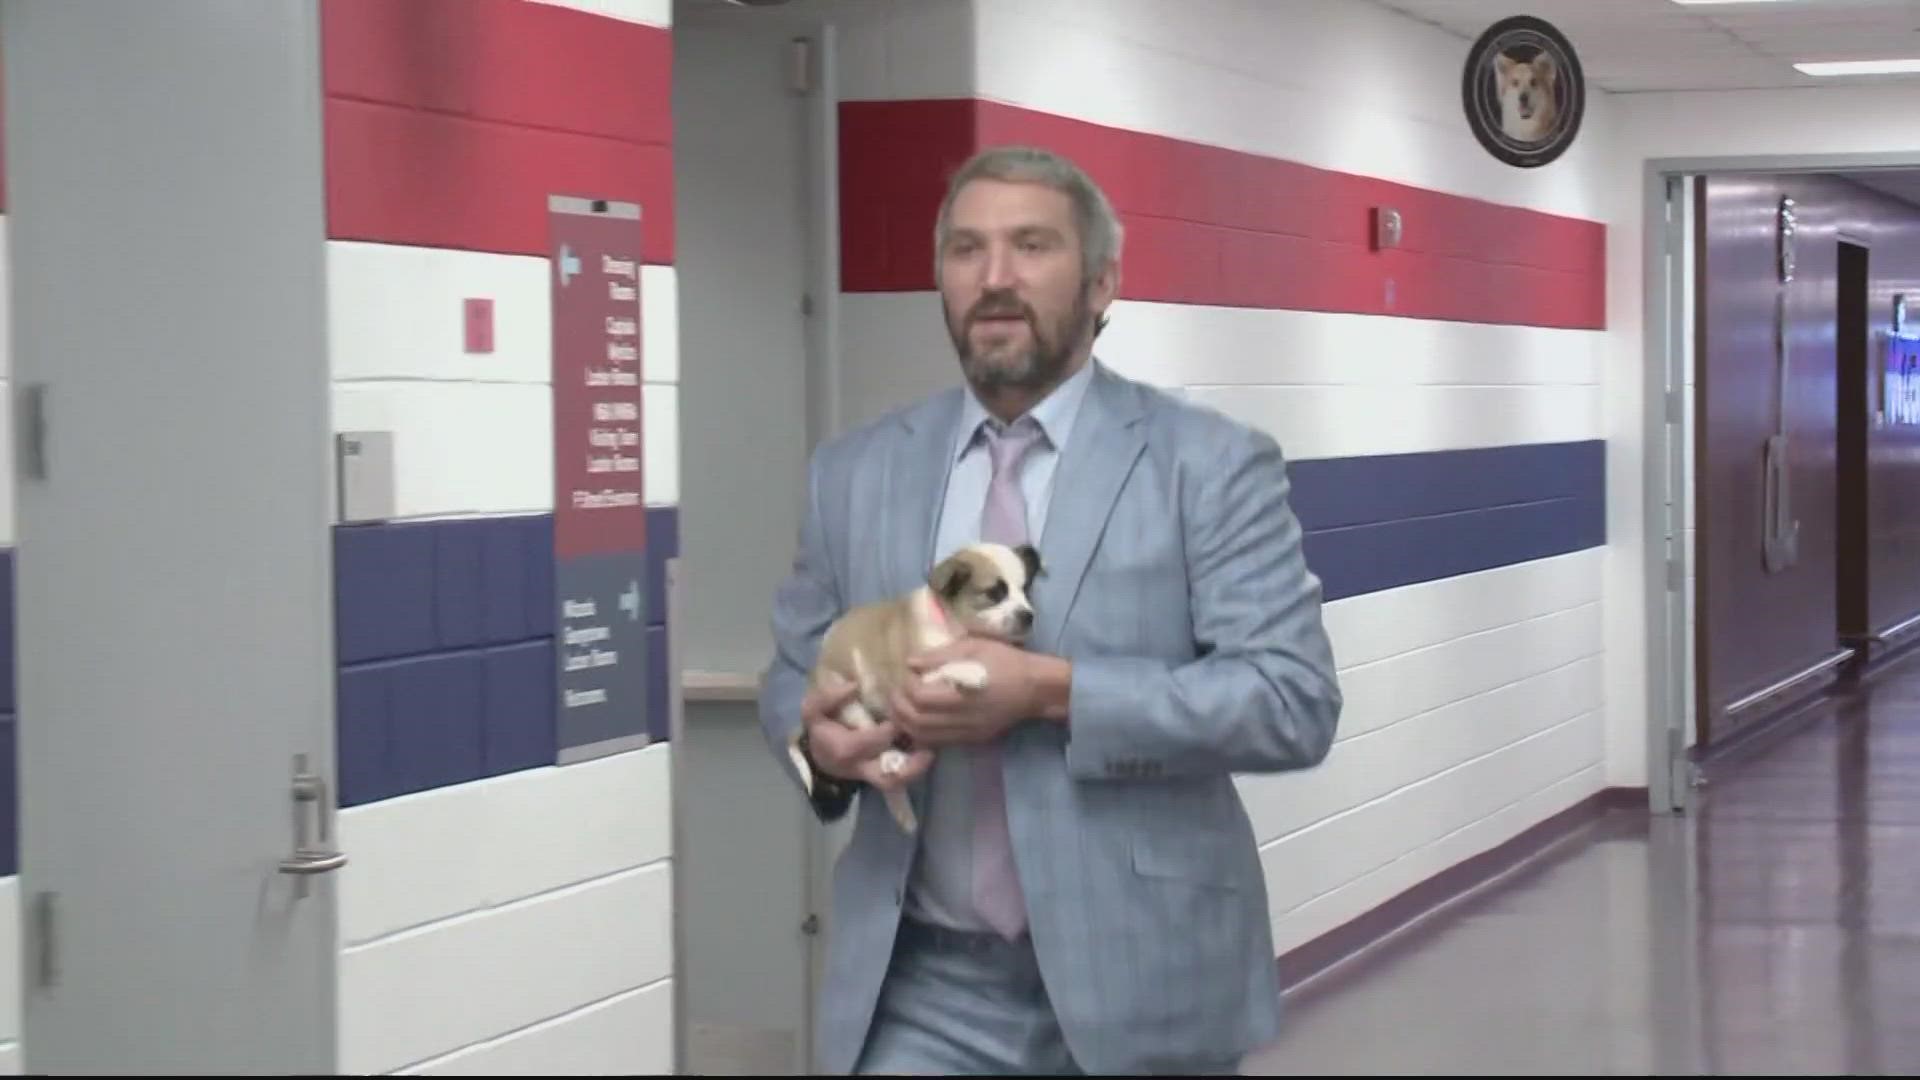 Alex Ovechkin returns to the Capitals tonight, just in time for 'Caps canines night'